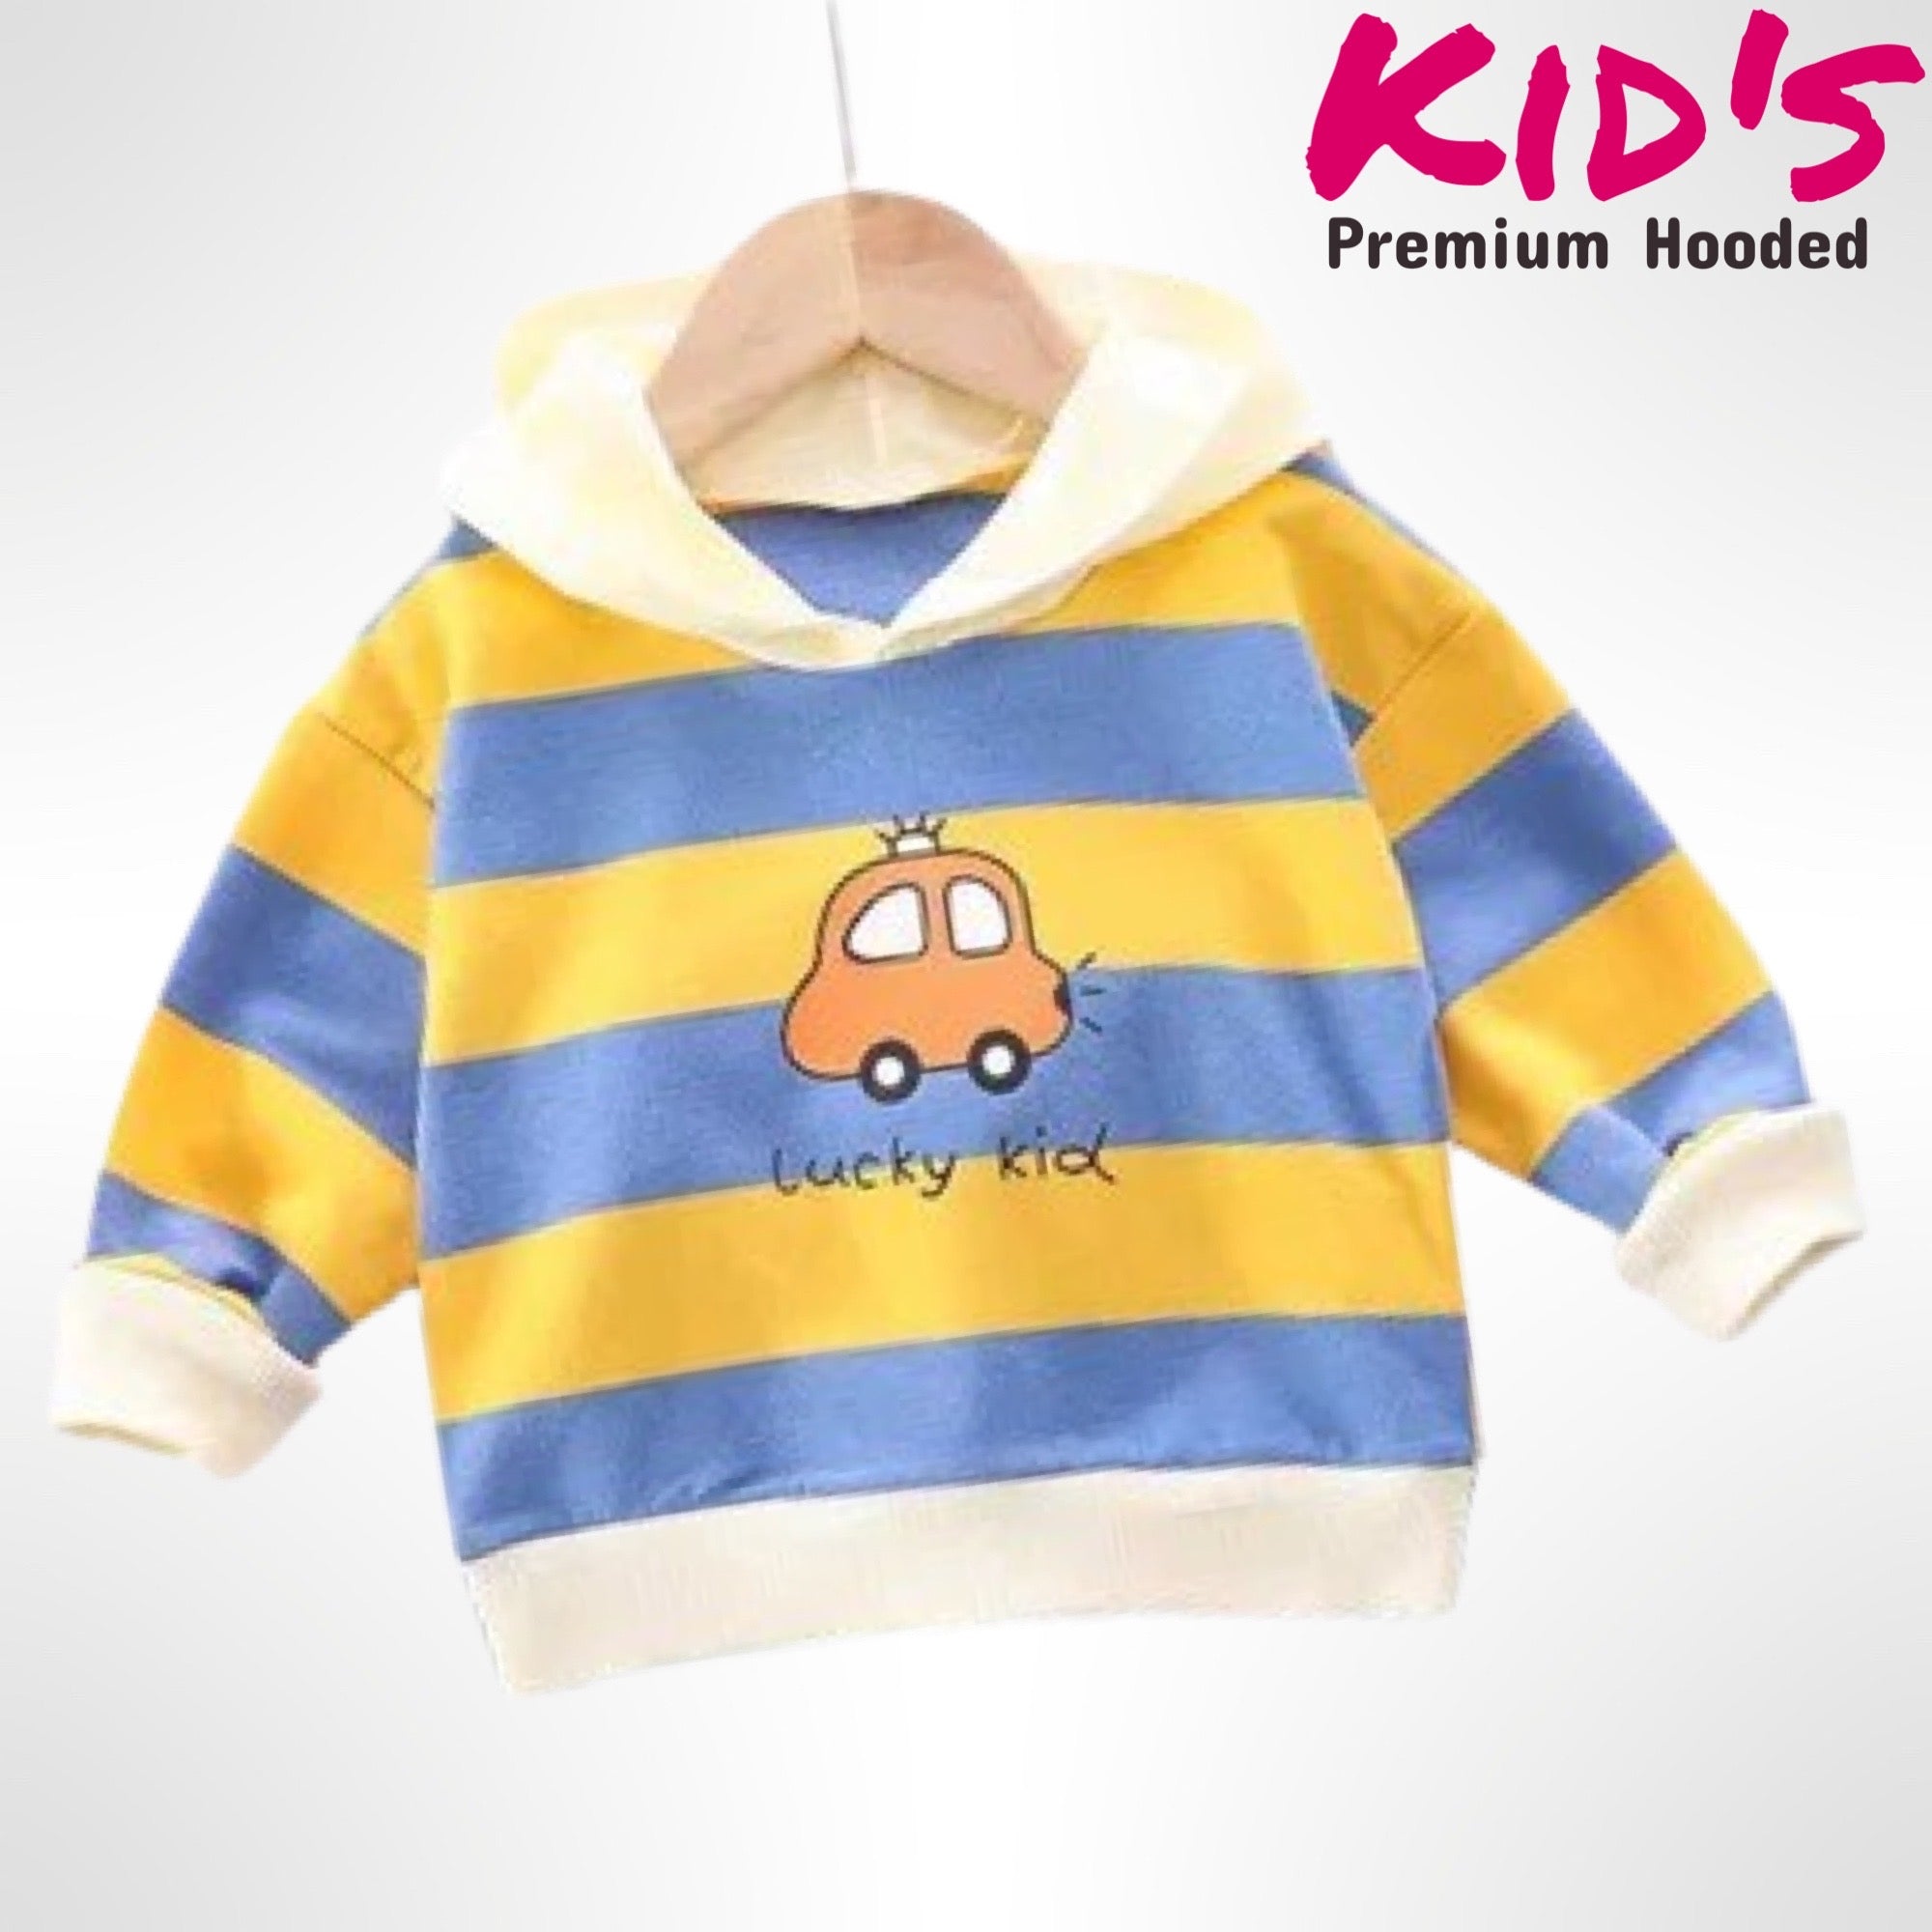 Hooded Children's Clothing Boys Girls Kids Clothing Special Hoodiee collection - Legacy Boutiques